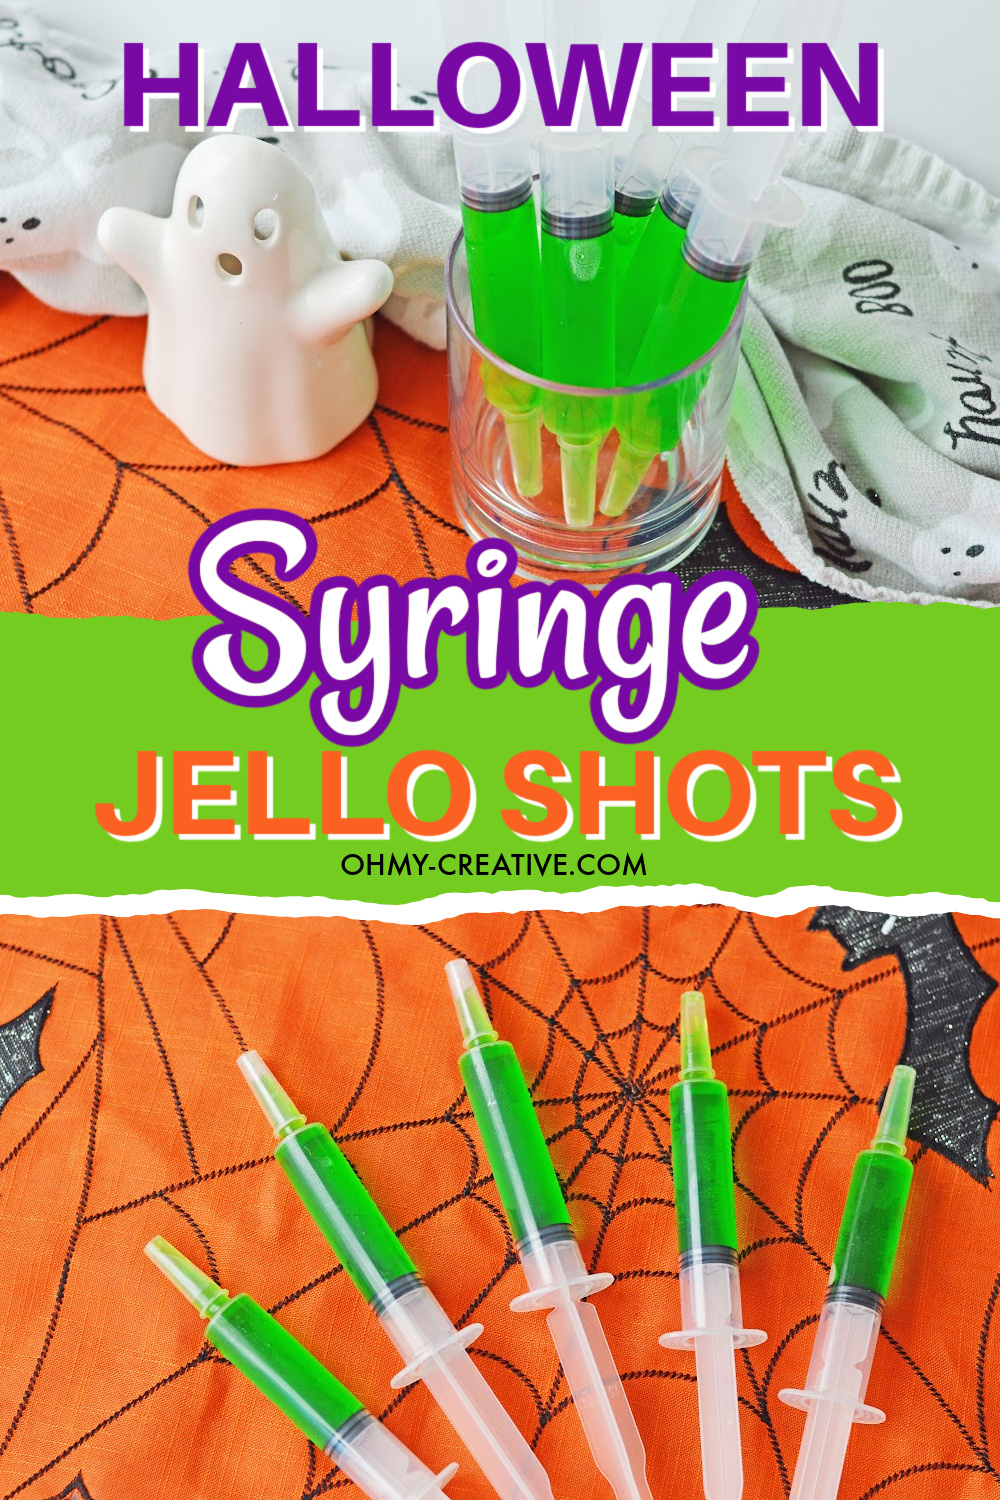 Green syringe jello shots laying on an orange spiderweb placemat. In a second image a glass container is holding the green syringe jello shots